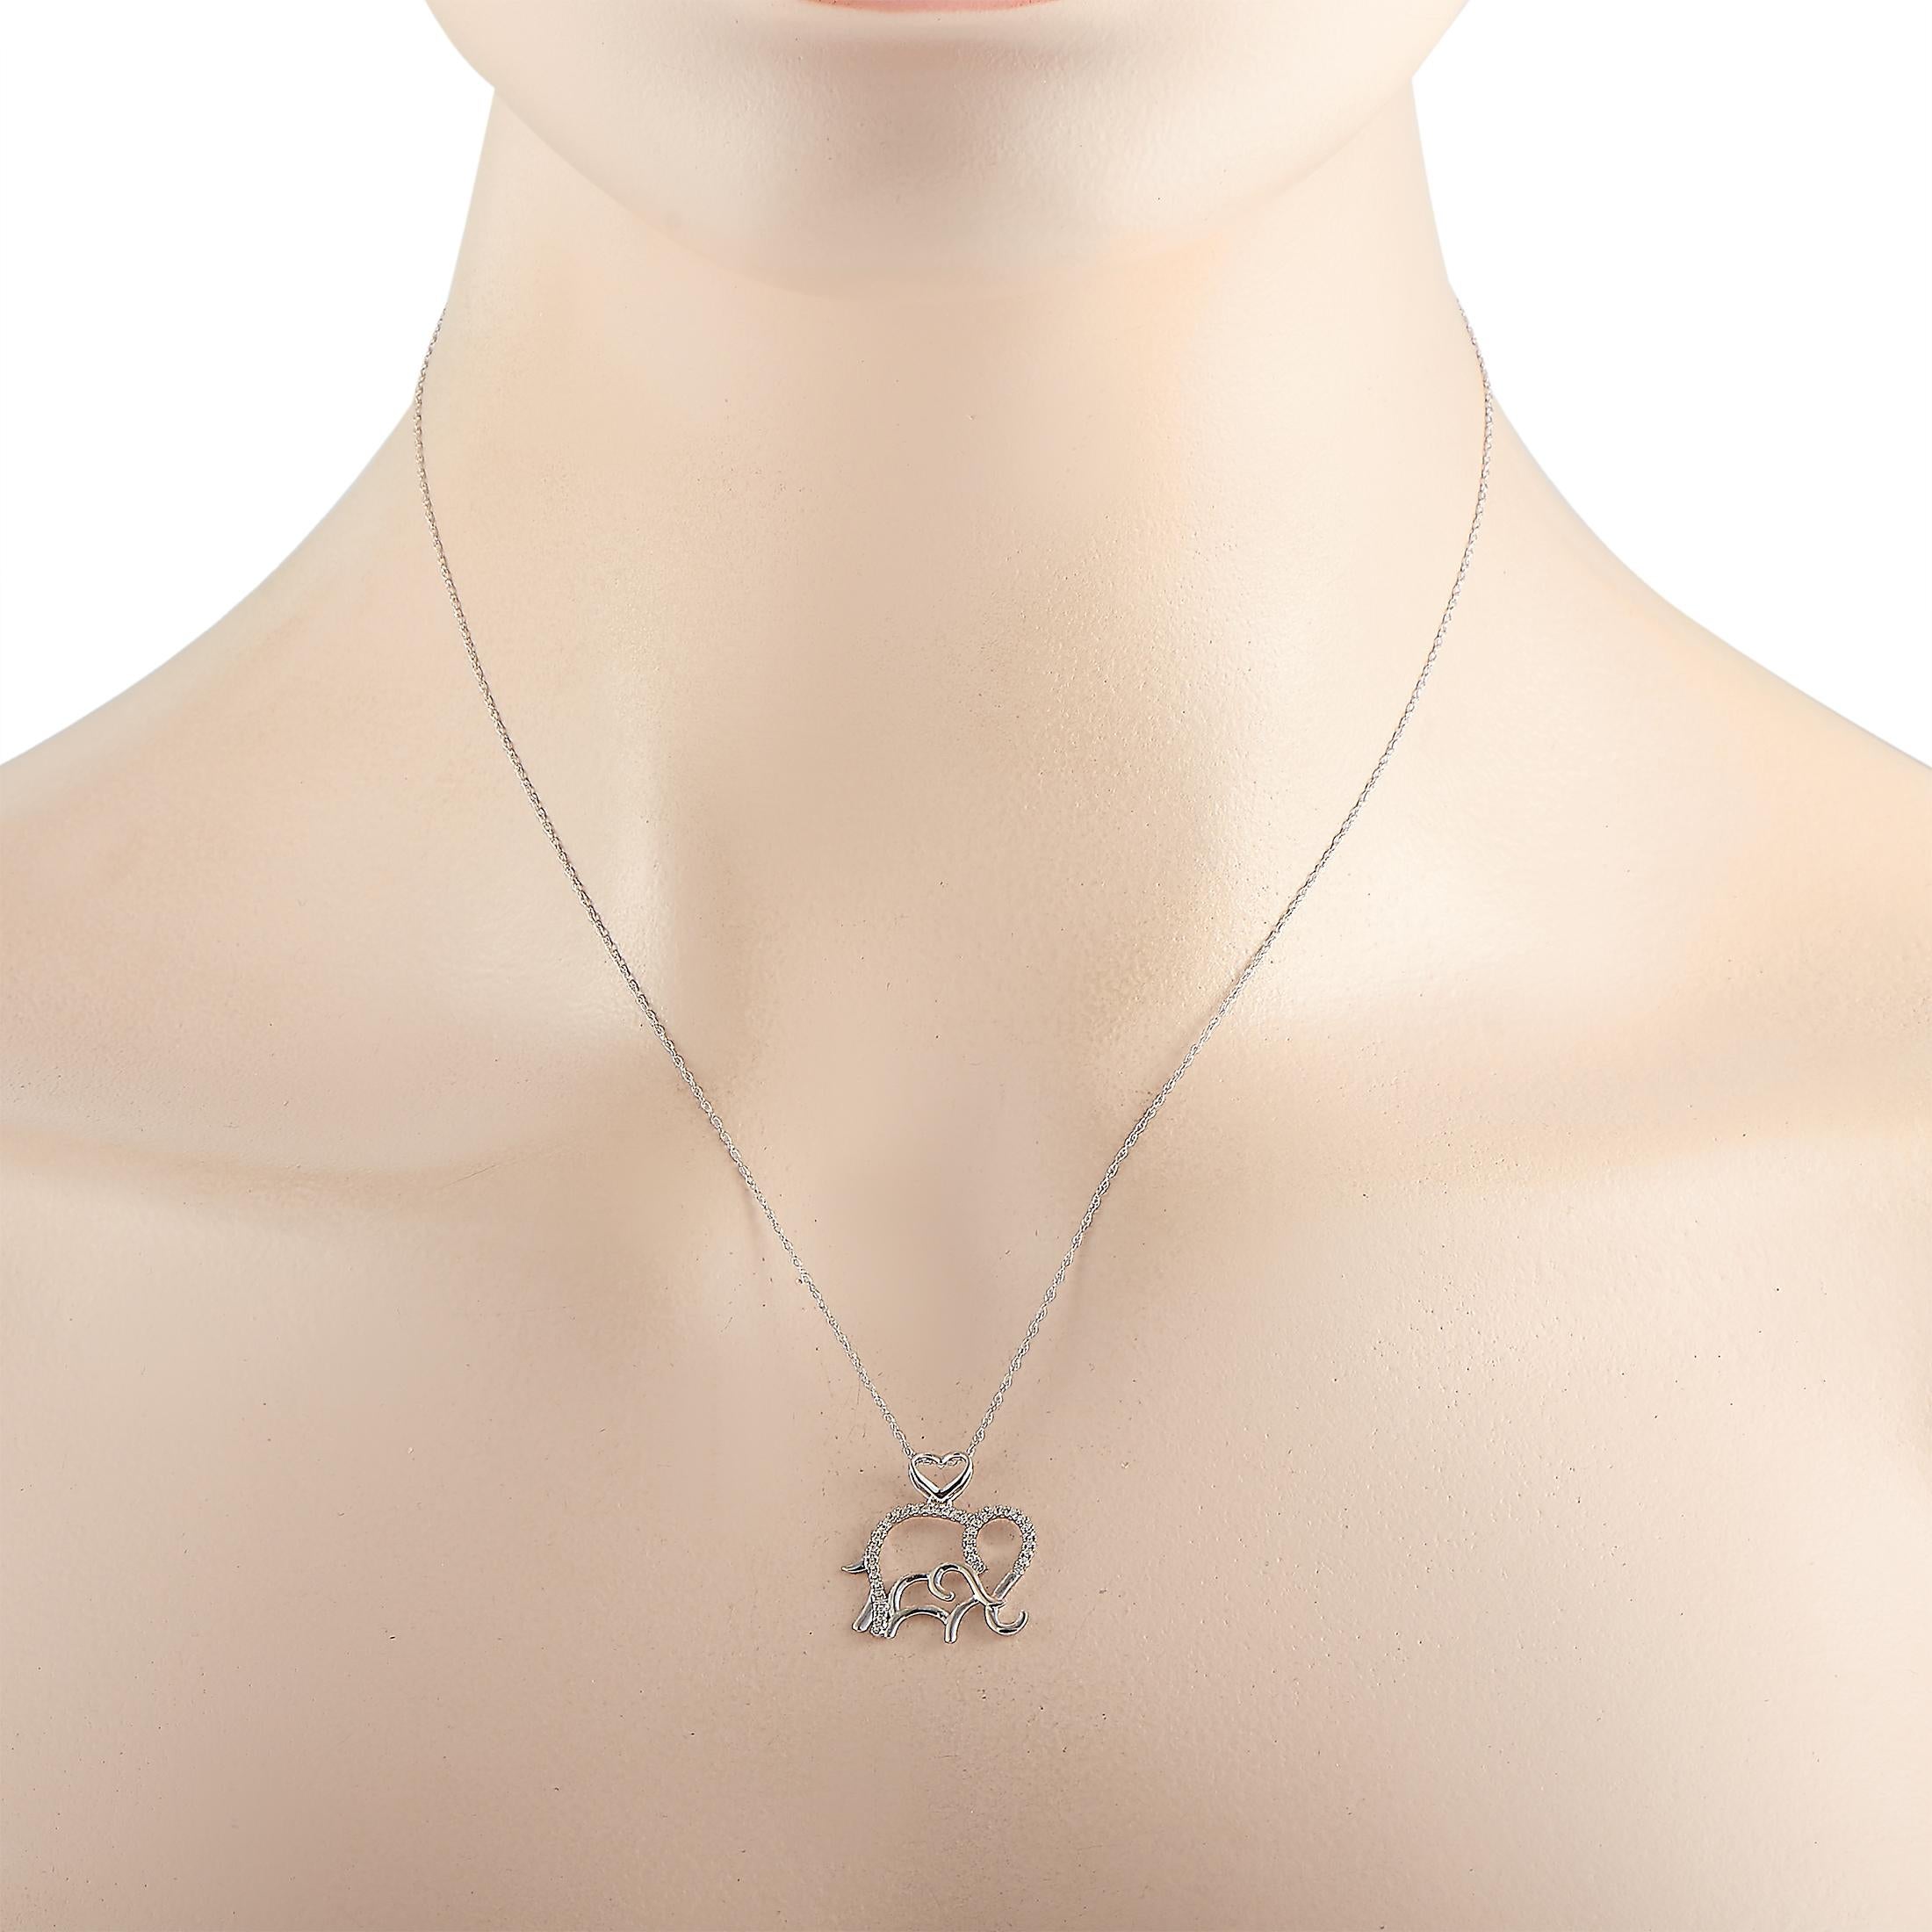 This LB Exclusive necklace is made of 14K white gold and embellished with diamonds that amount to 0.10 carats. The necklace weighs 1.6 grams and boasts a 17” chain and an elephant pendant that measures 0.75” in length and 0.88” in width.
 
 Offered